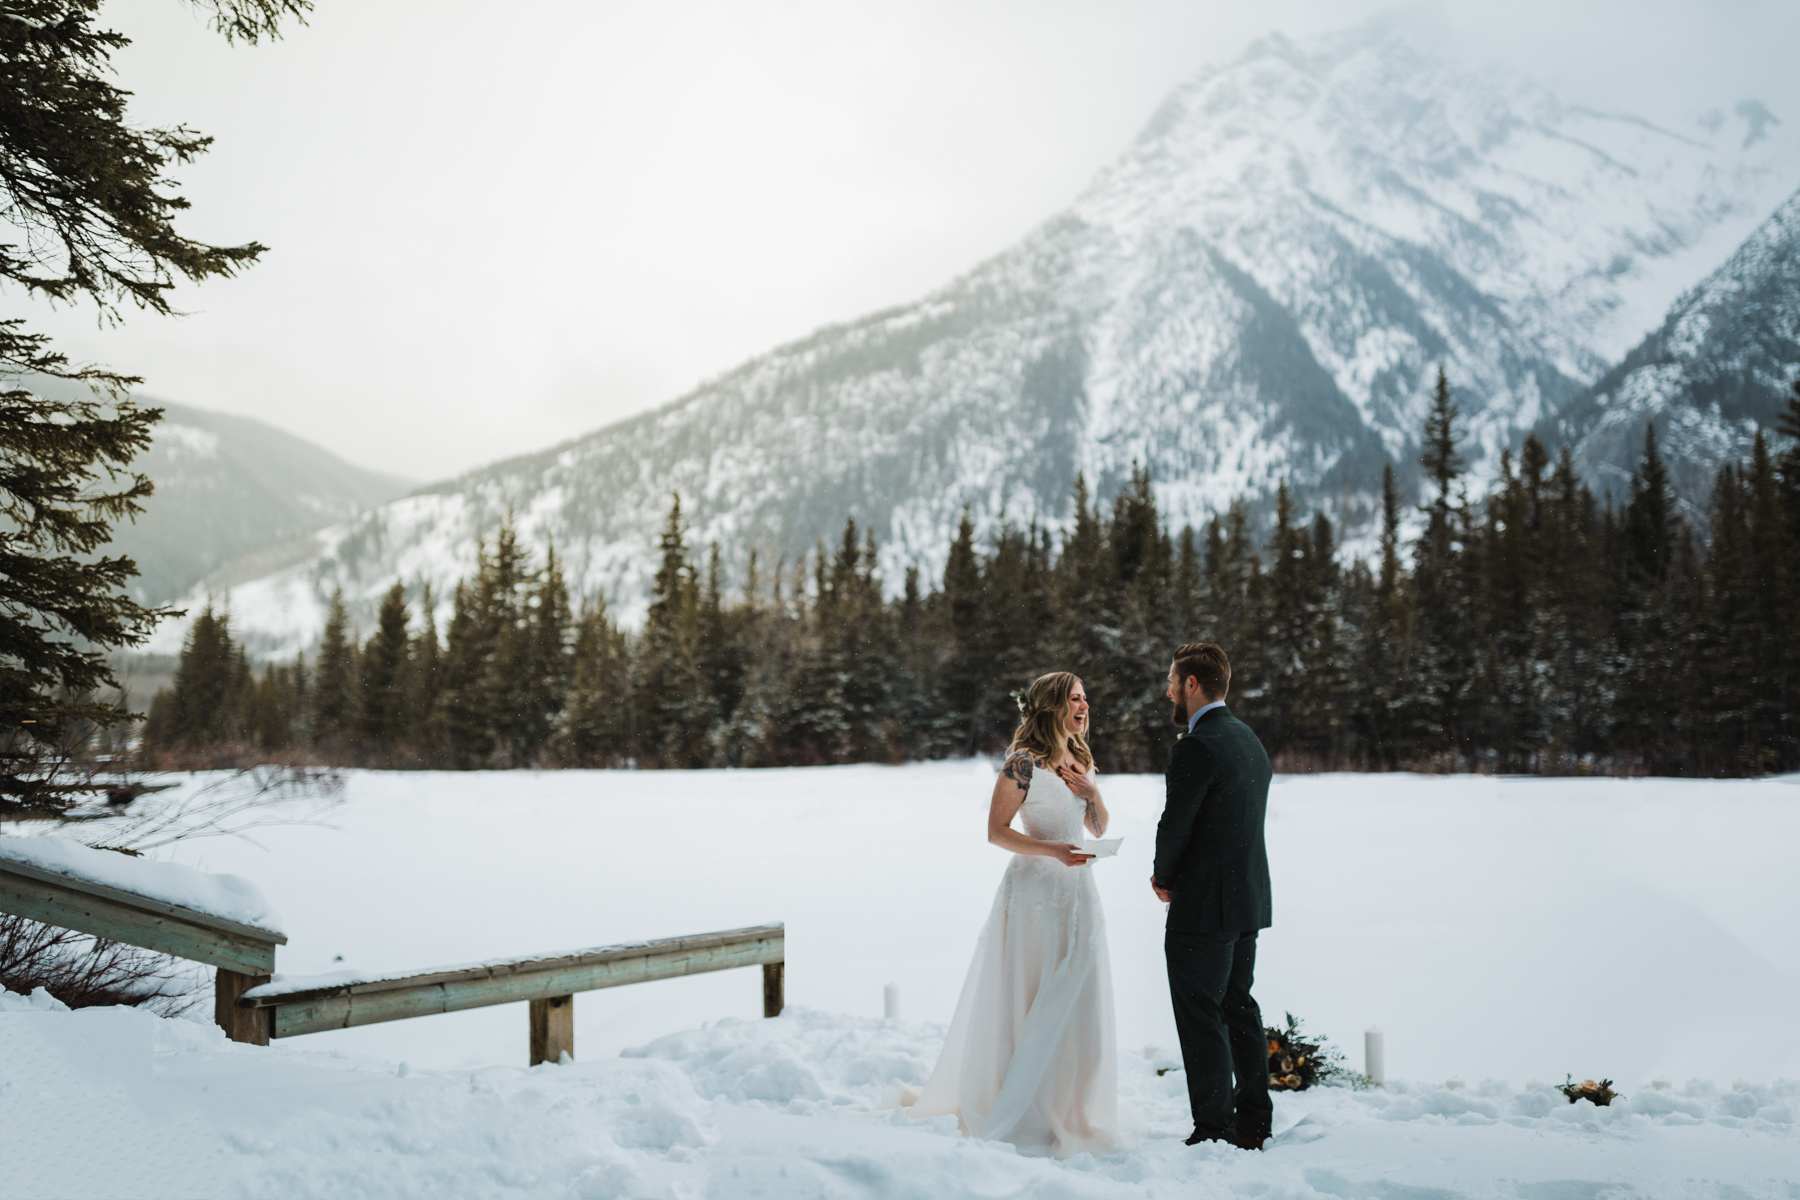 Canmore Elopement Photographer in the Canadian Rockies - Image 25